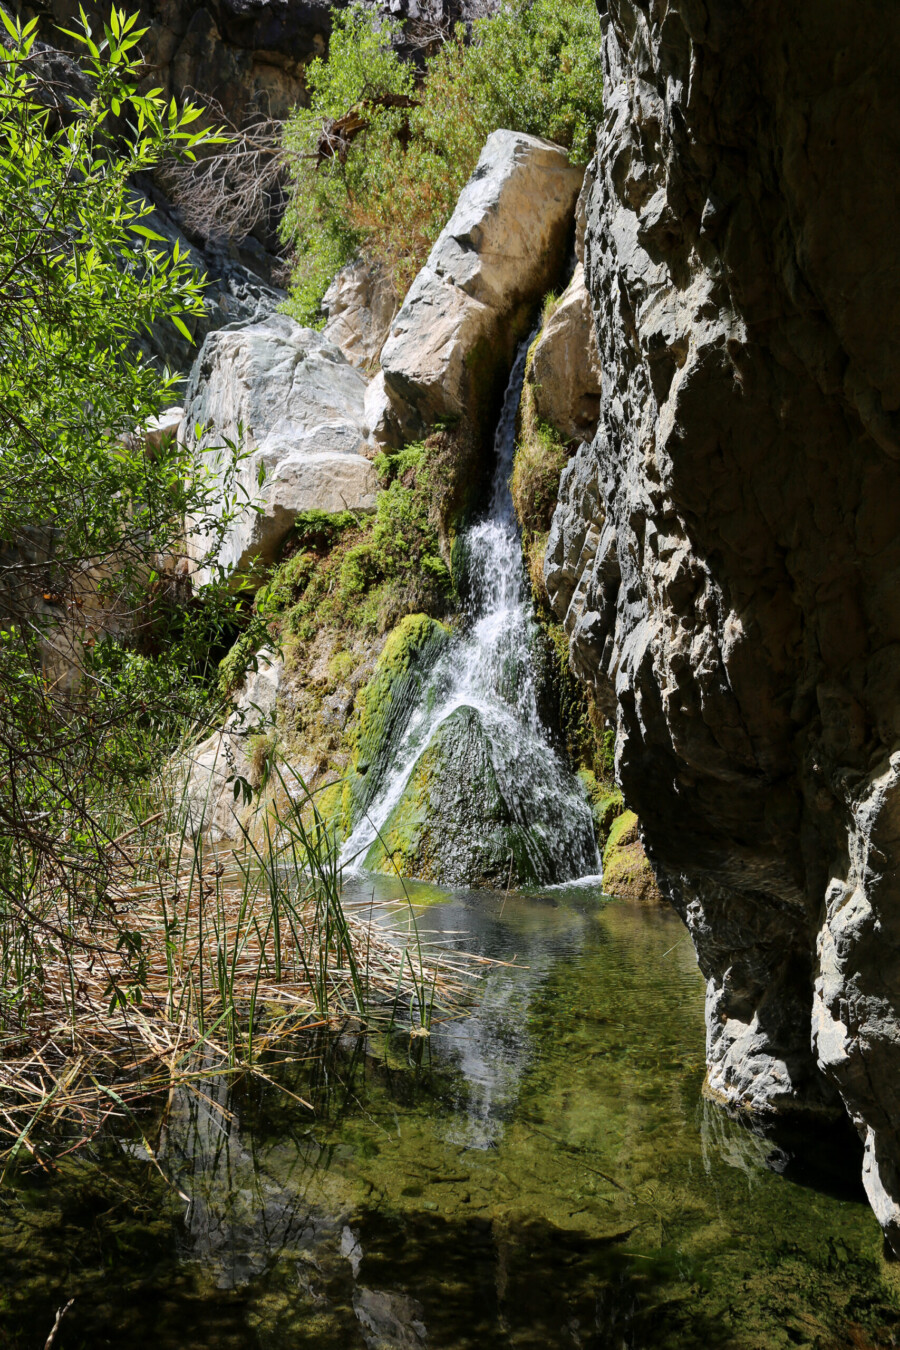 A small waterfall against rocky cliffs at Darwin Falls in Death Valley National Park.